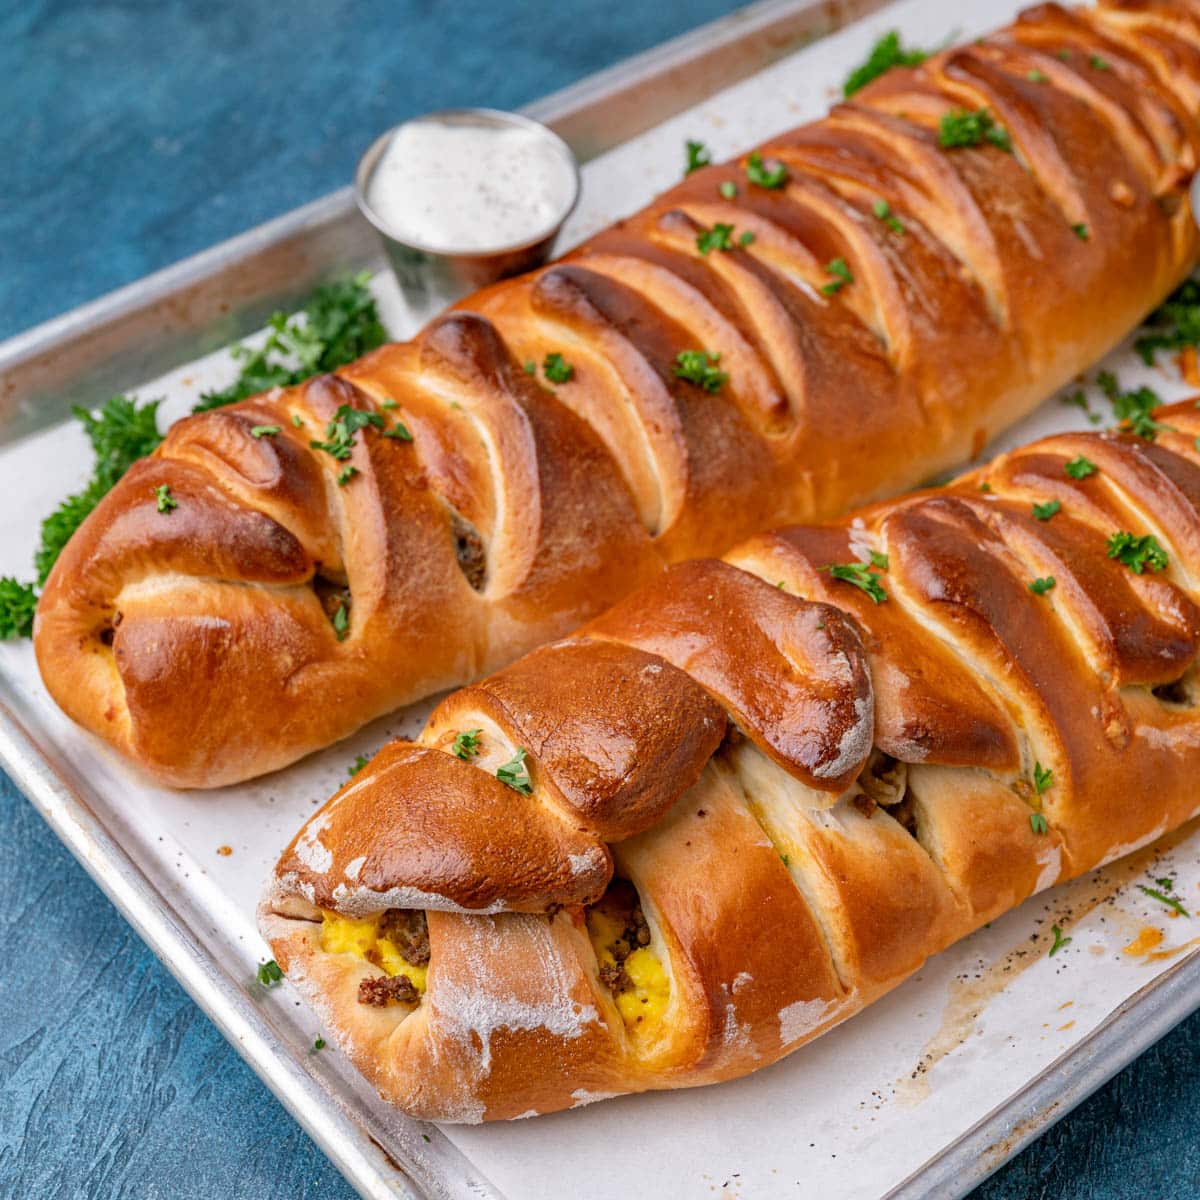 two breakfast stromboli with a braided top on a baking sheet